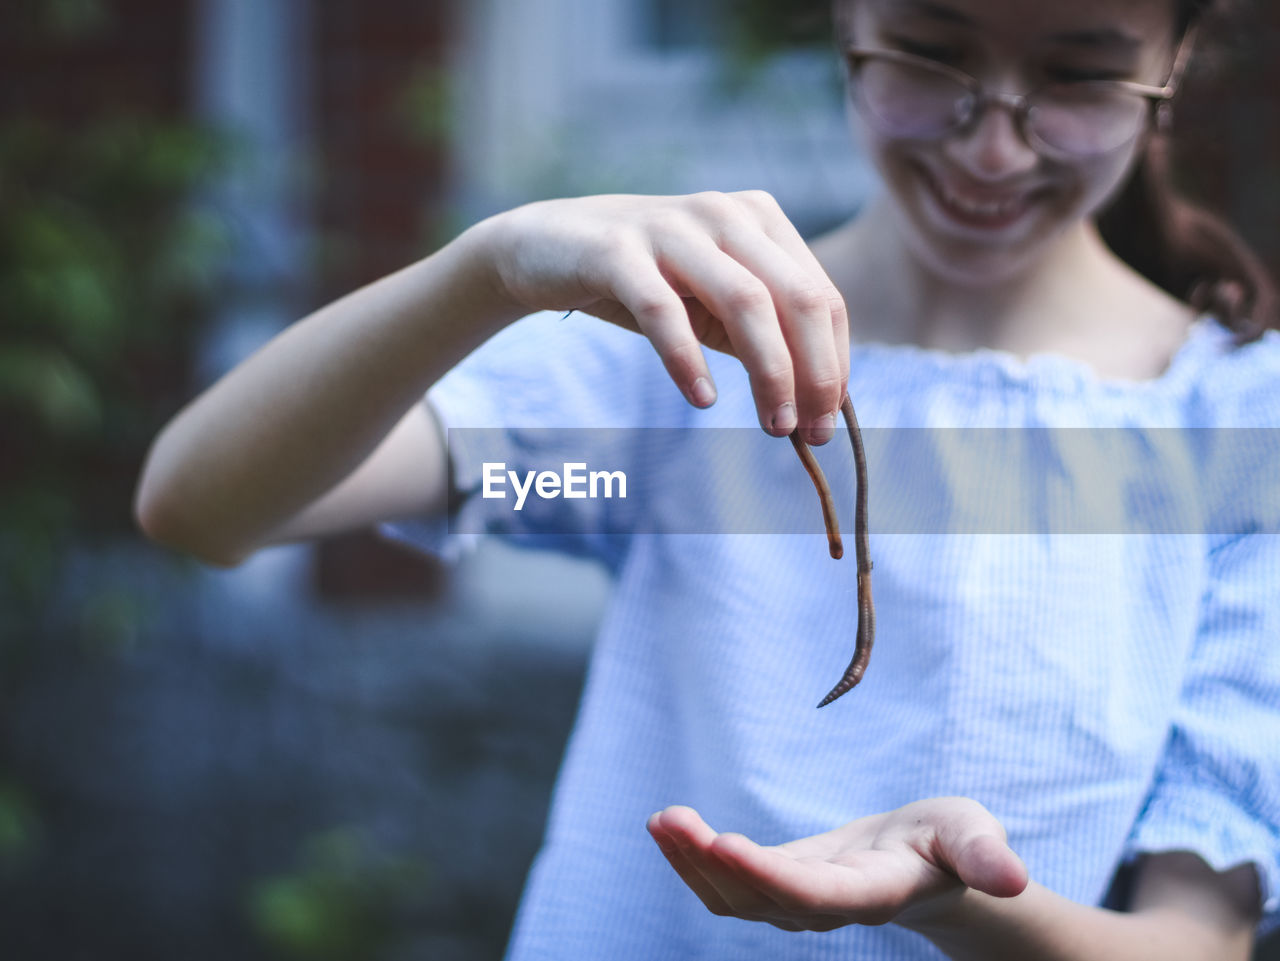 The girl holds an earthworm in her hands.